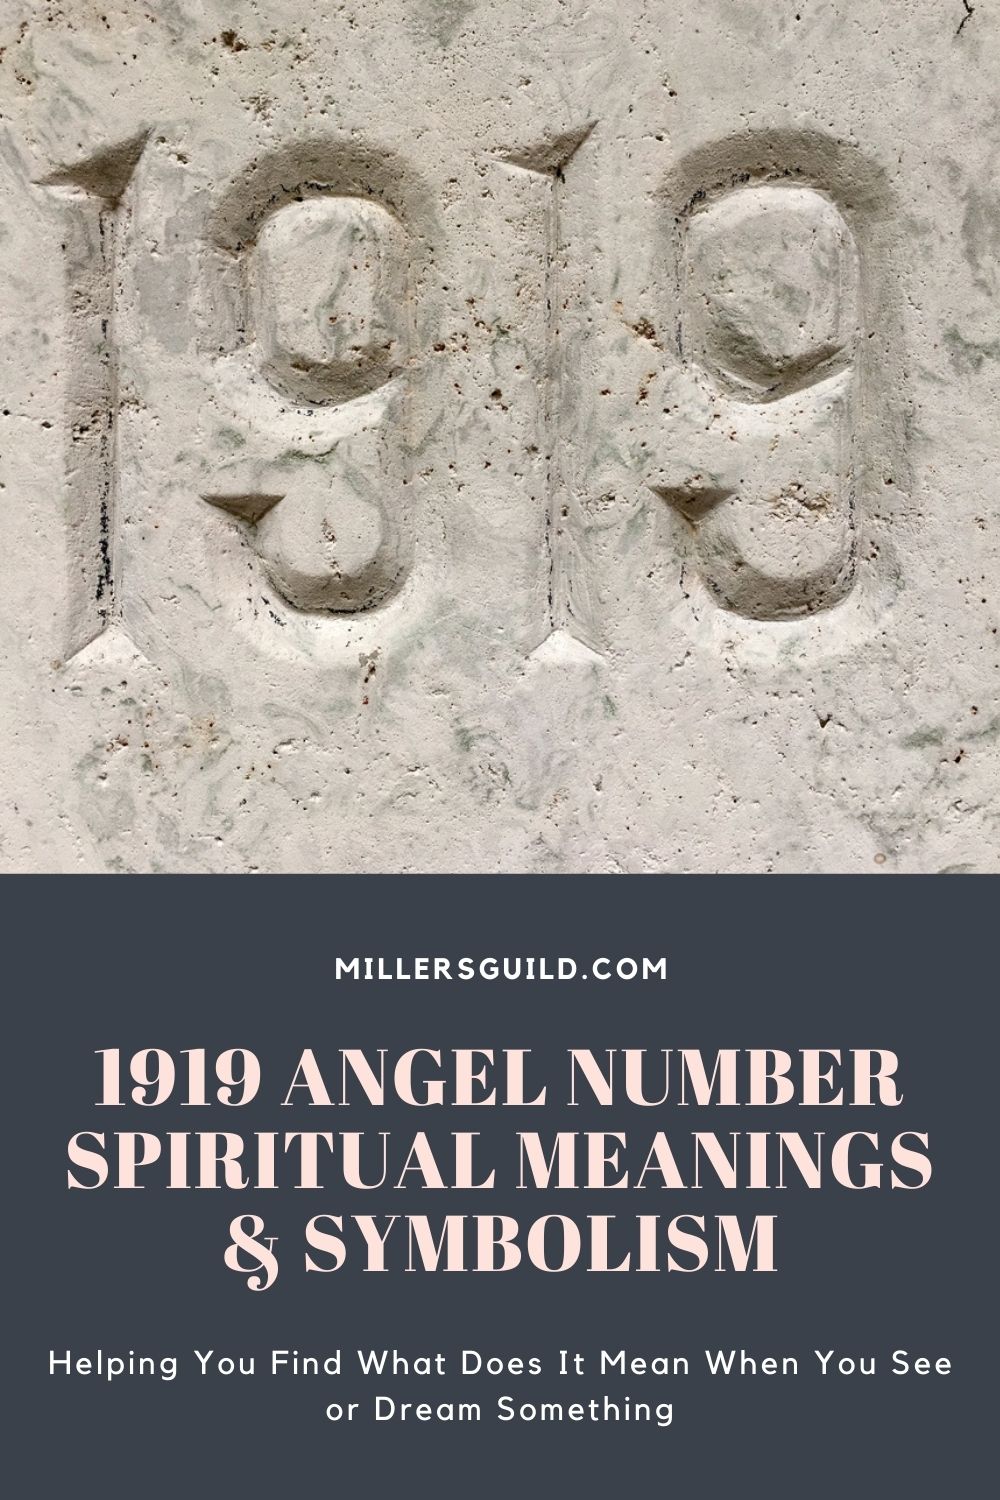 1919 Angel Number Spiritual Meanings & Symbolism 2